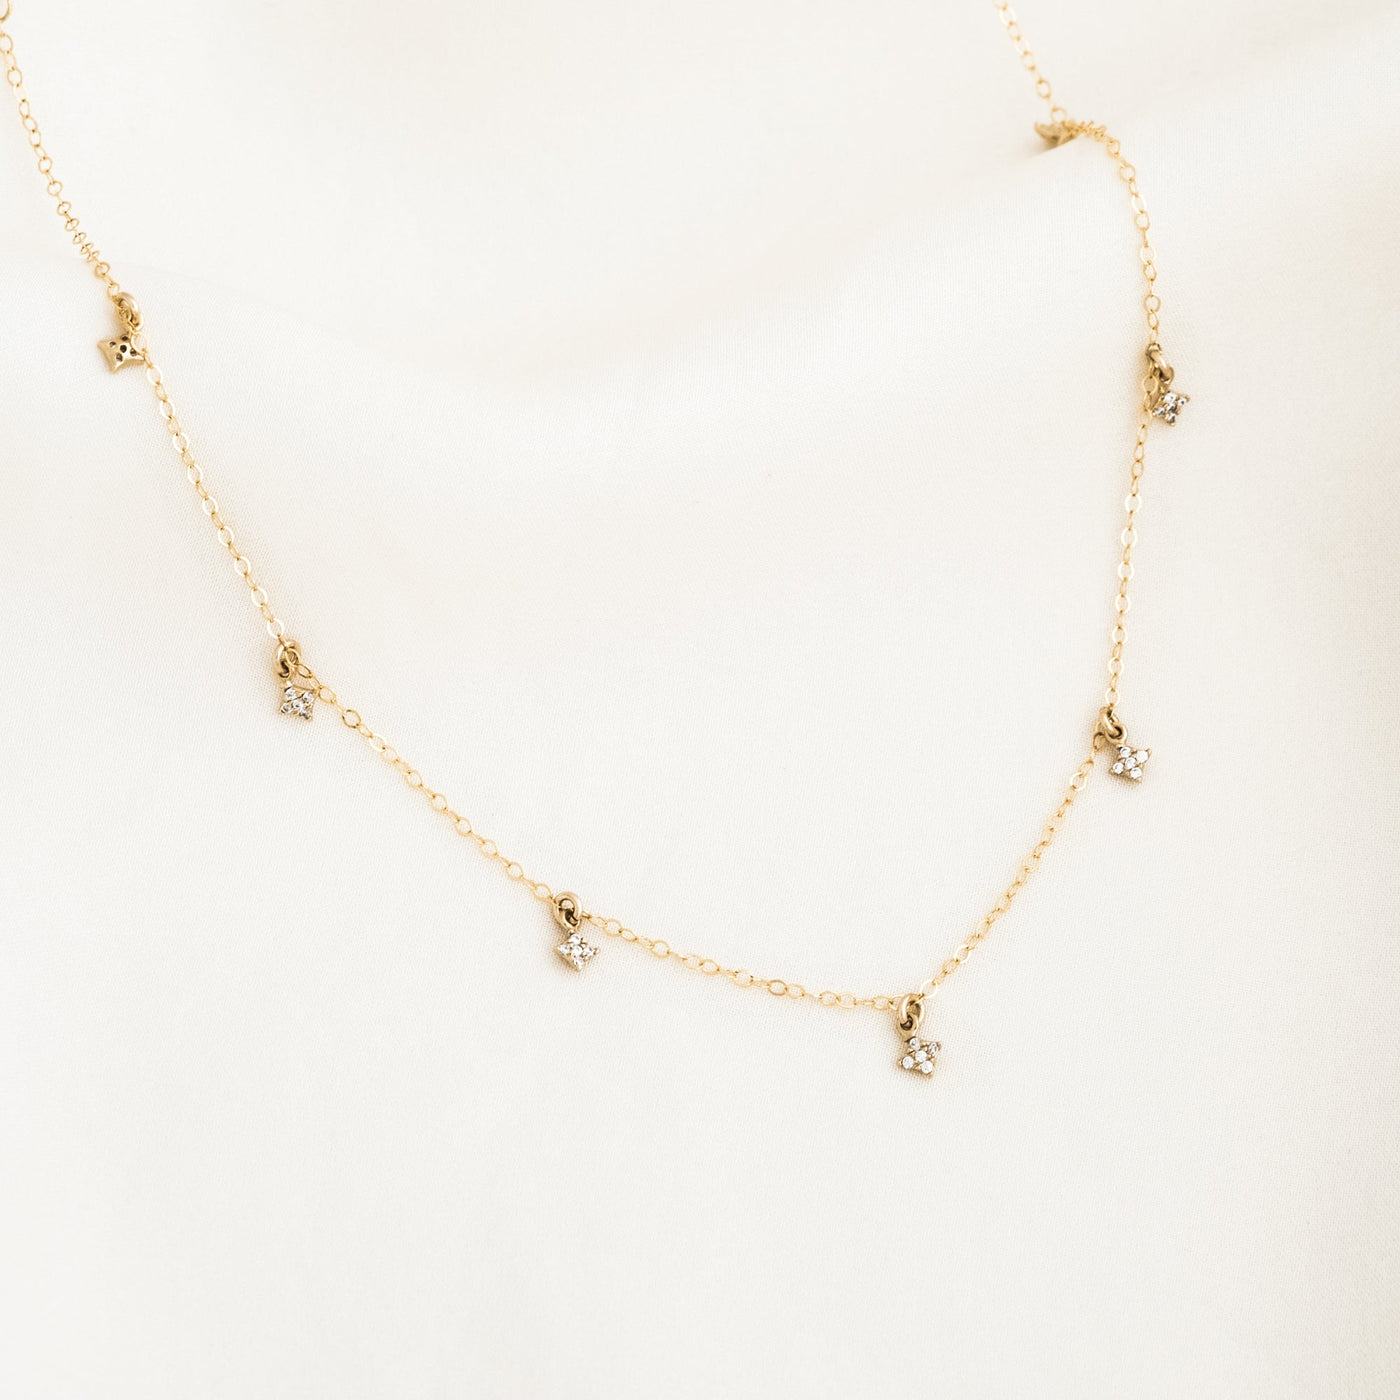 Dangling Stardust Necklace | Simple & Dainty Jewelry